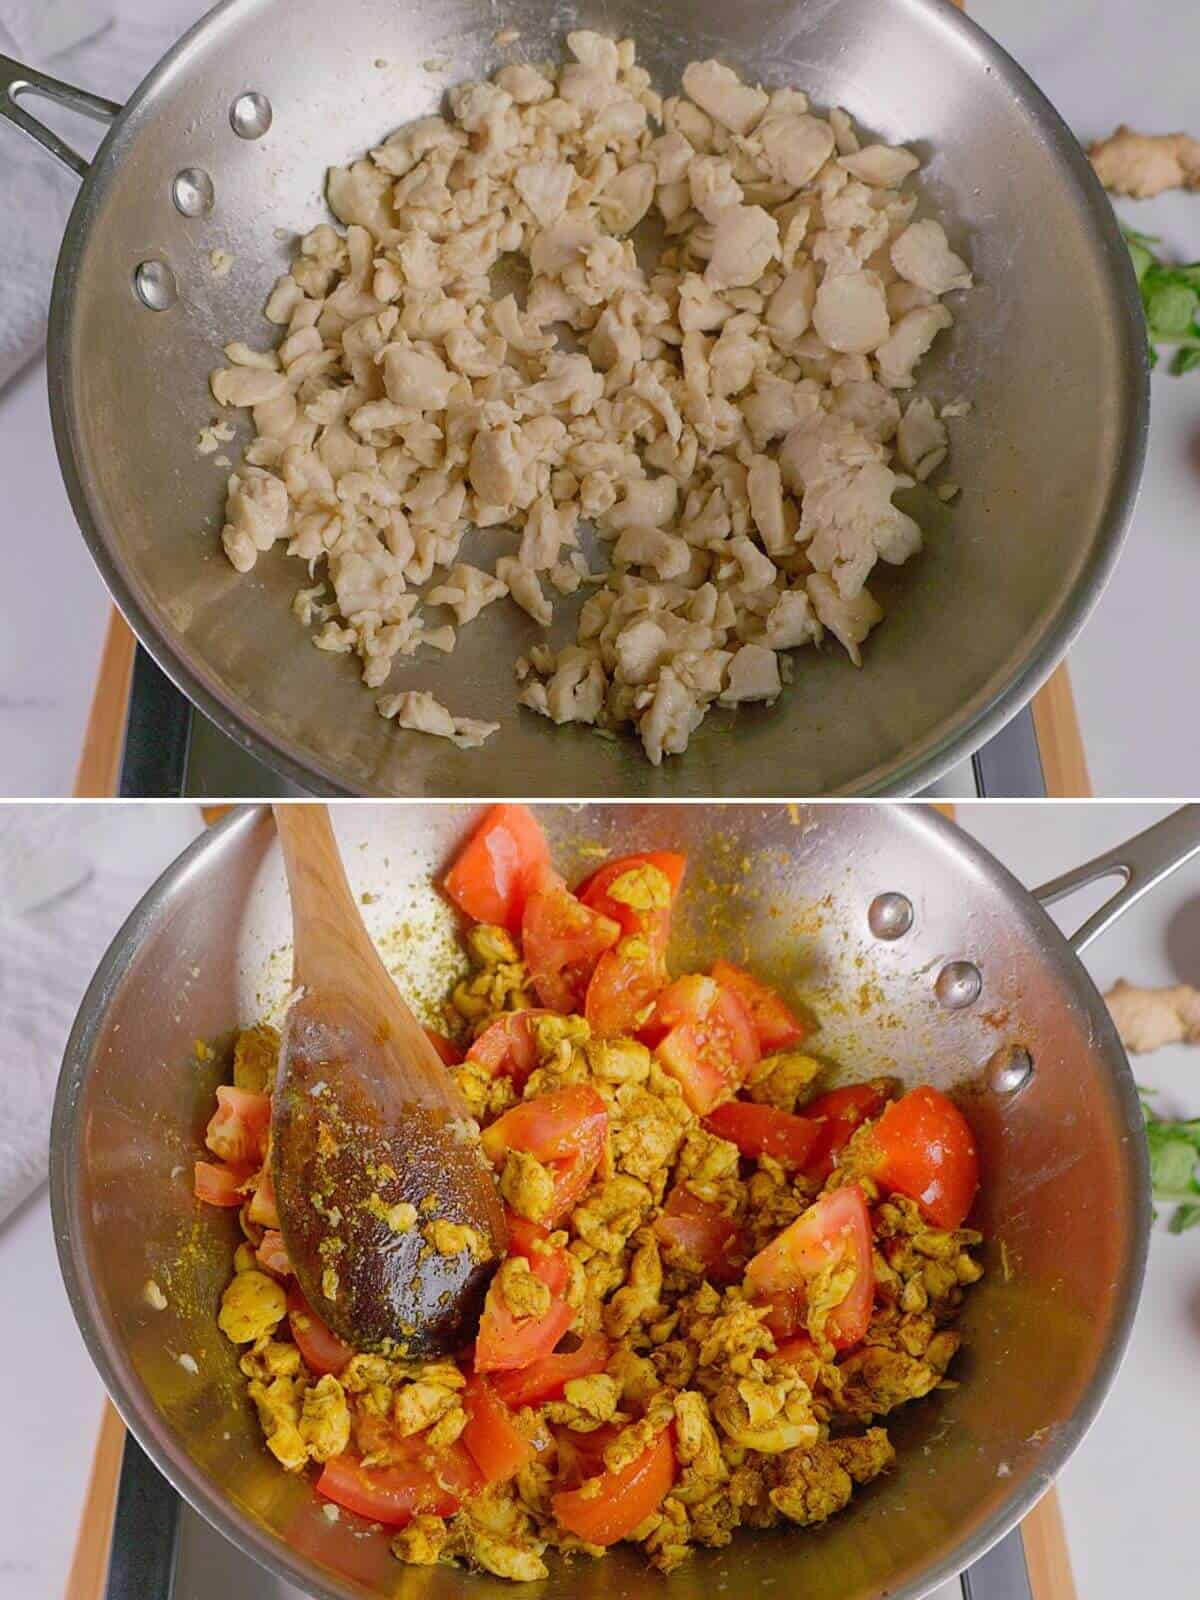 Cooking chicken with spices and tomatoes.